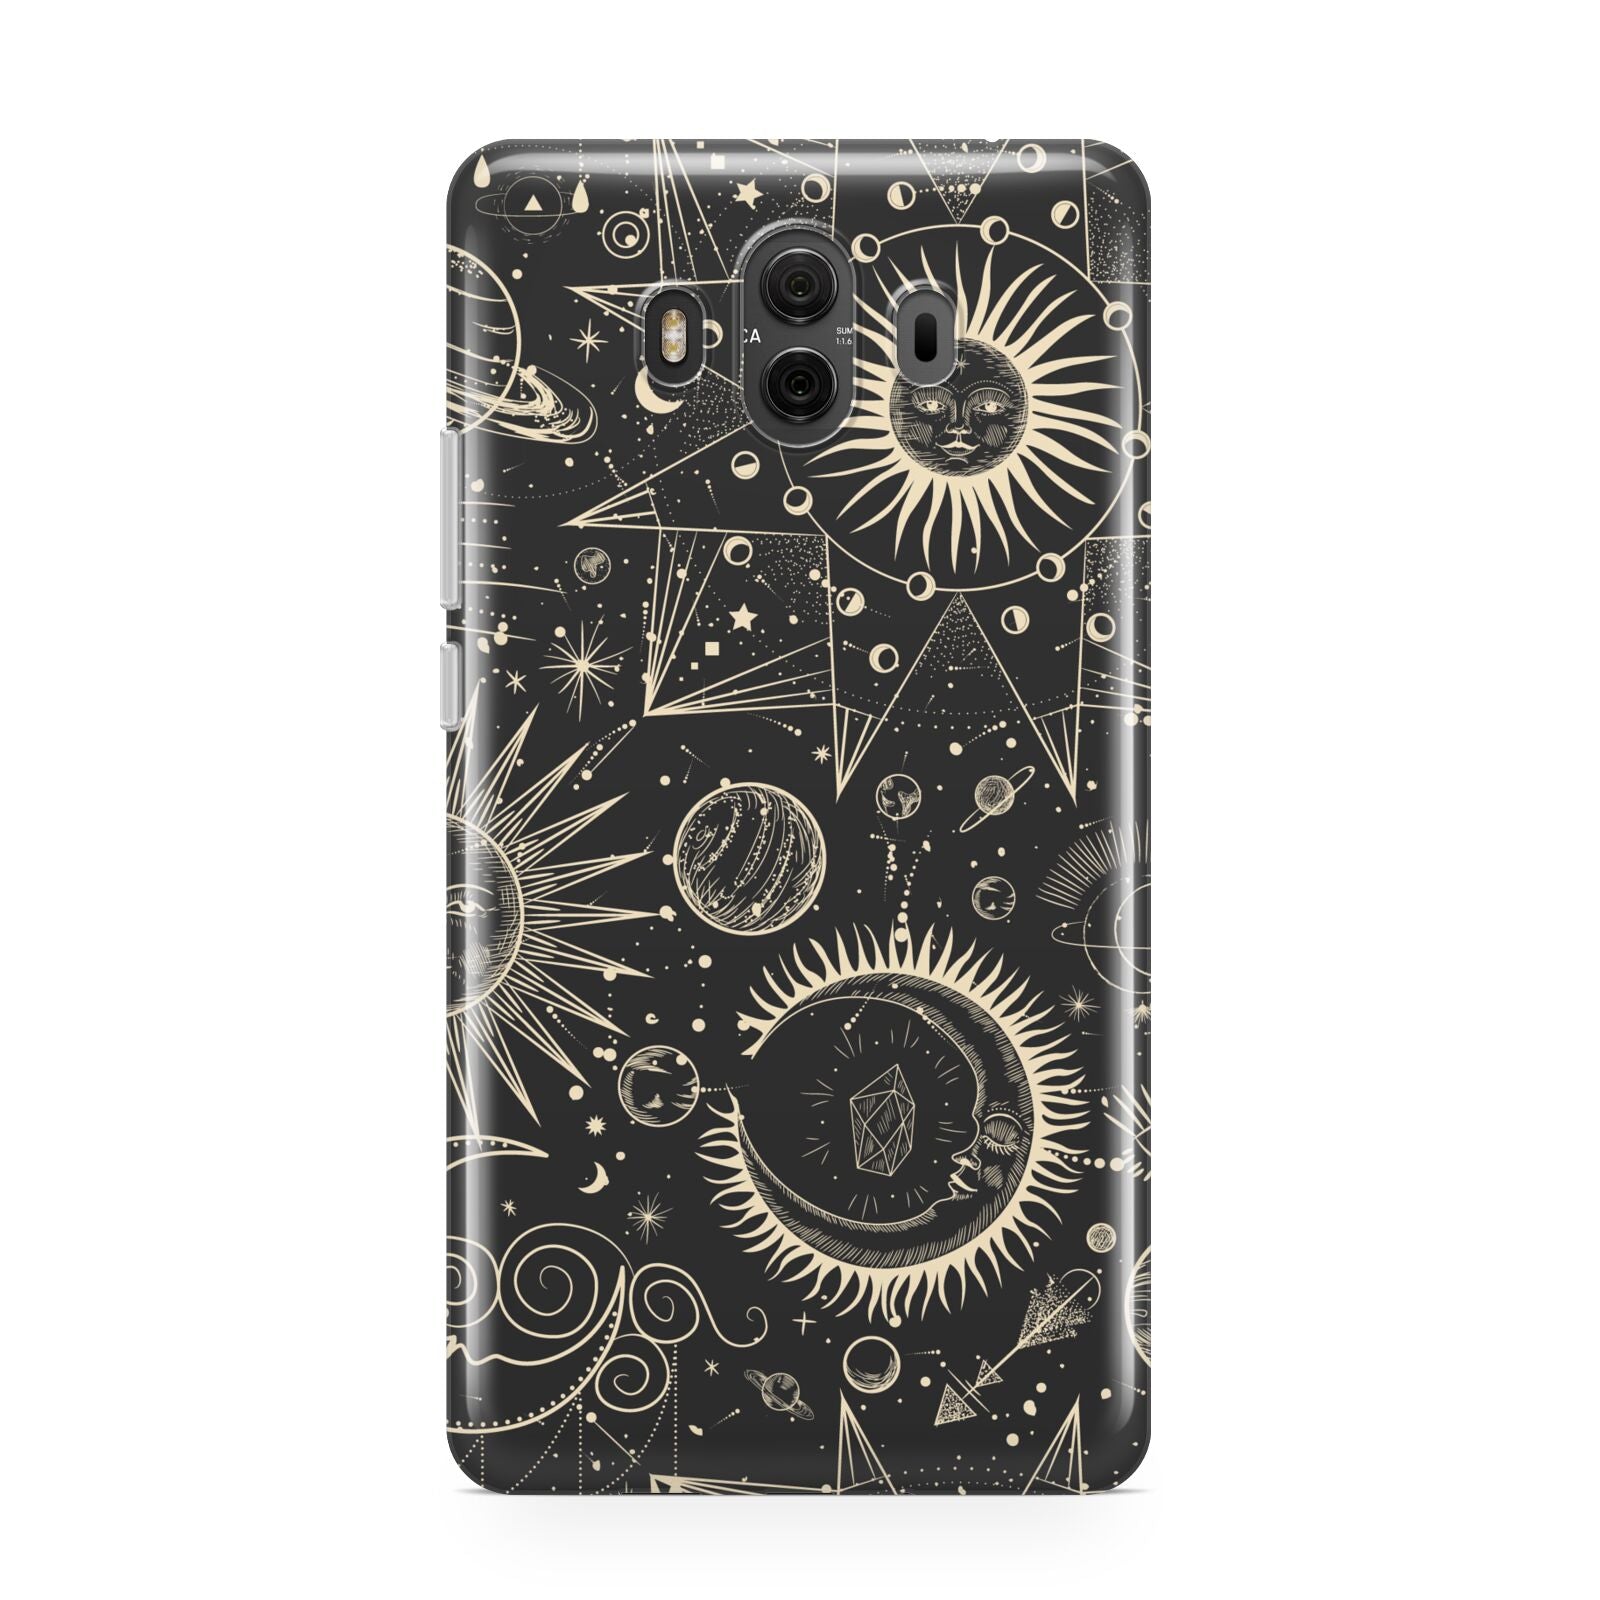 Moon Phases Huawei Mate 10 Protective Phone Case